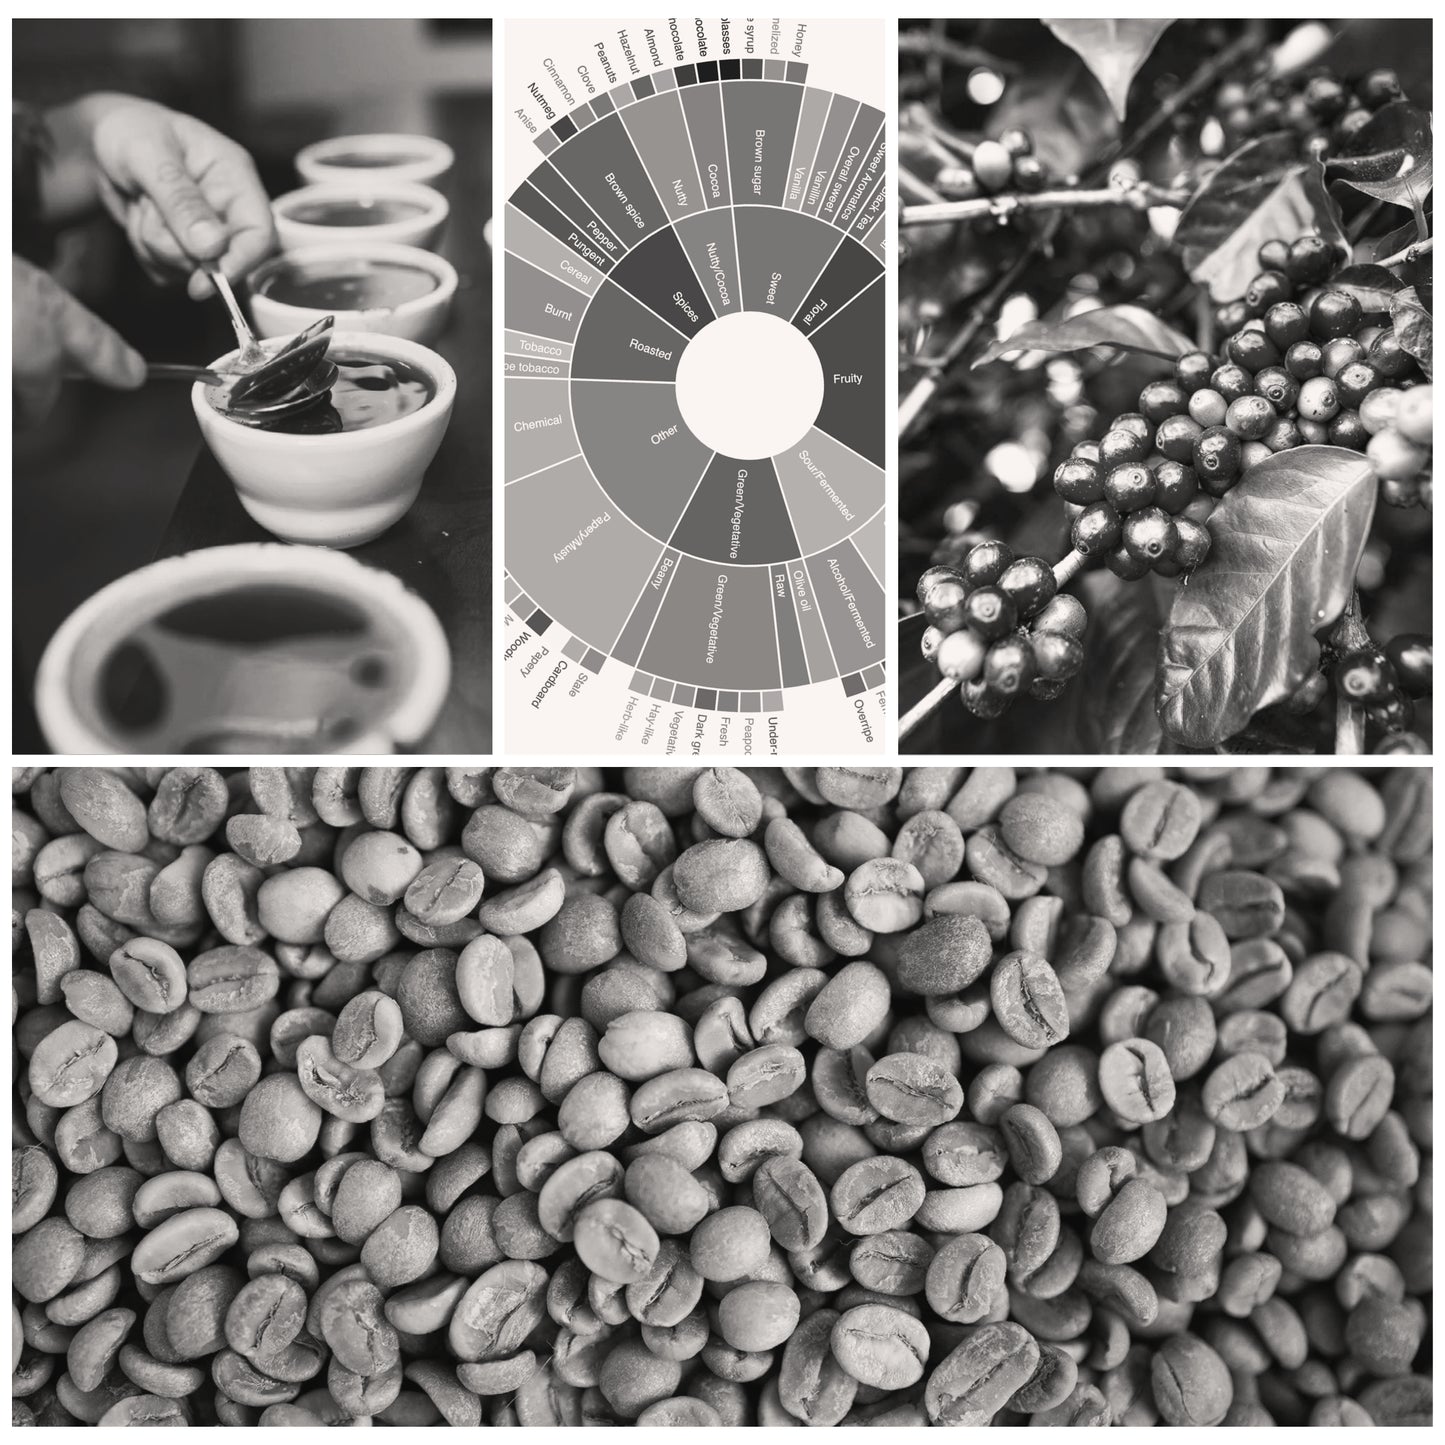 Green and Roasted Coffee Analysis